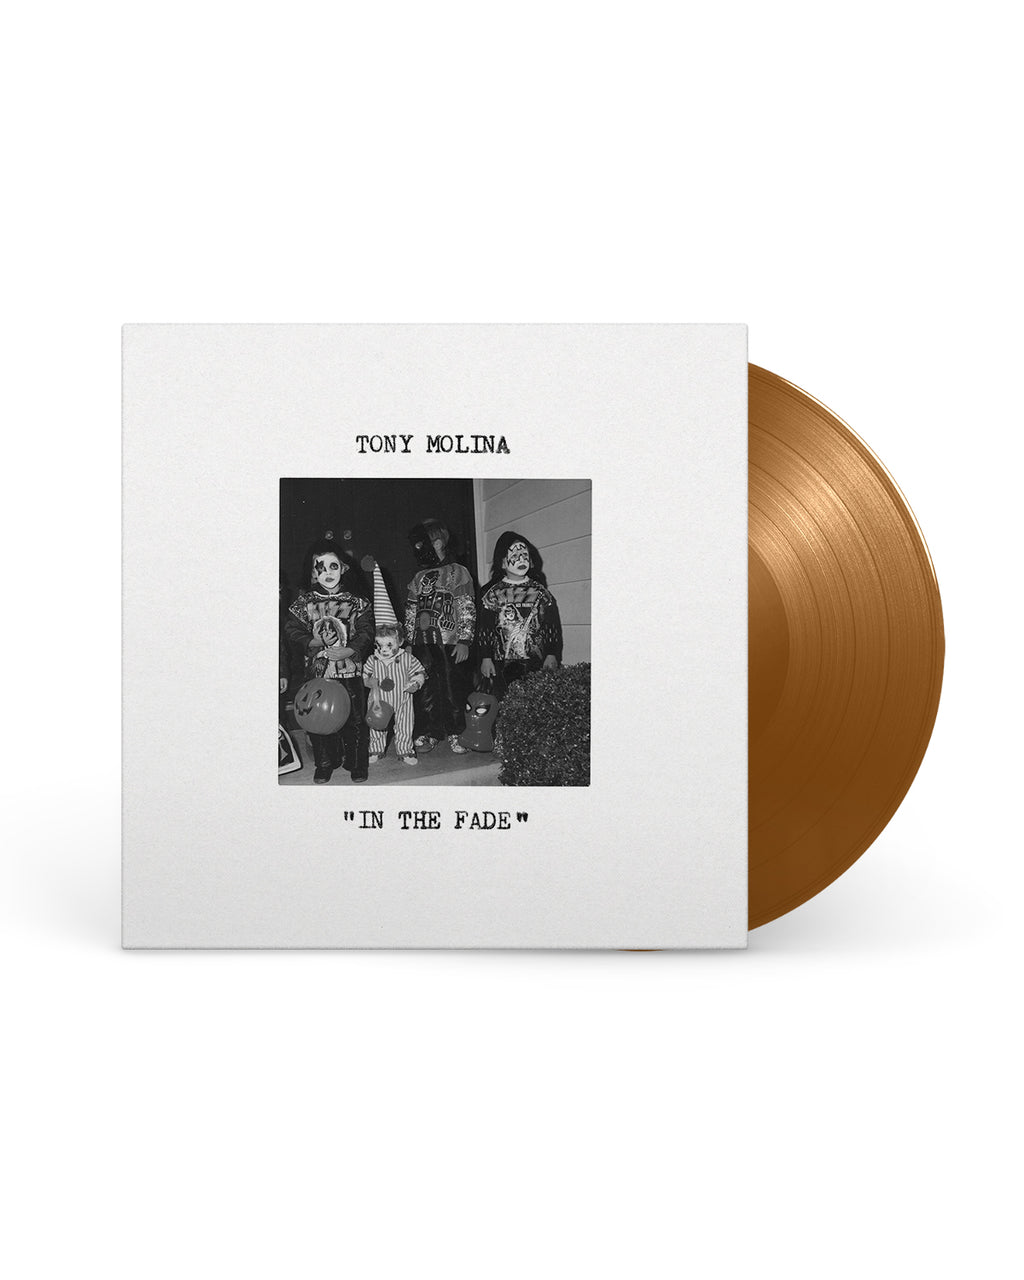 Tony Molina's "In The Fade" LP - Opaque Brown